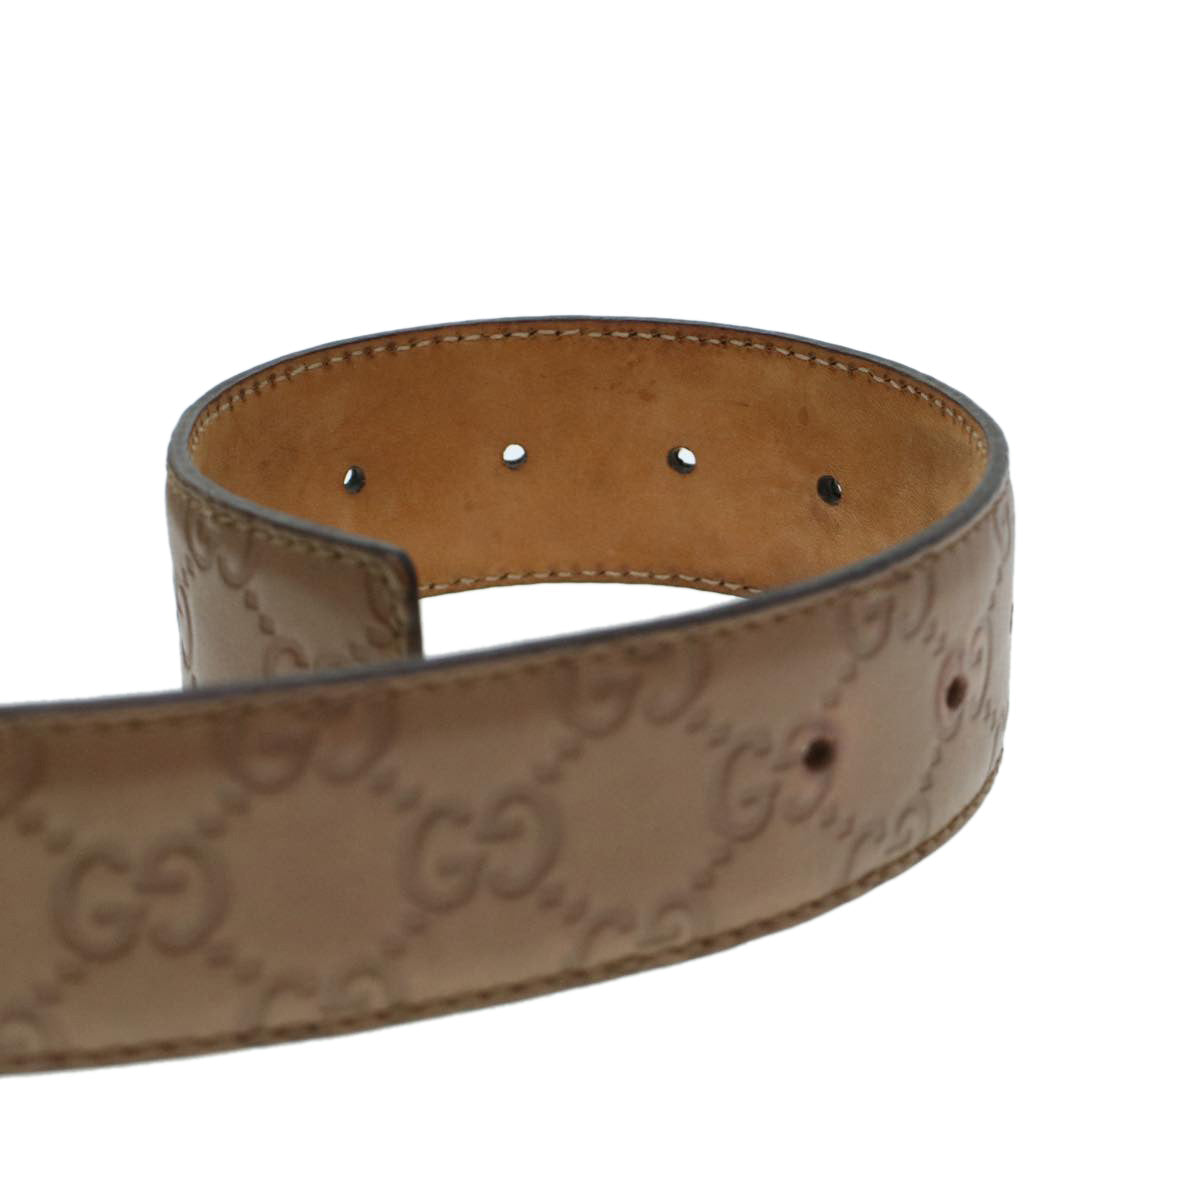 GUCCI GG Canvas Belt Leather 36.2""-43.3"" Brown 114984 Auth hk727